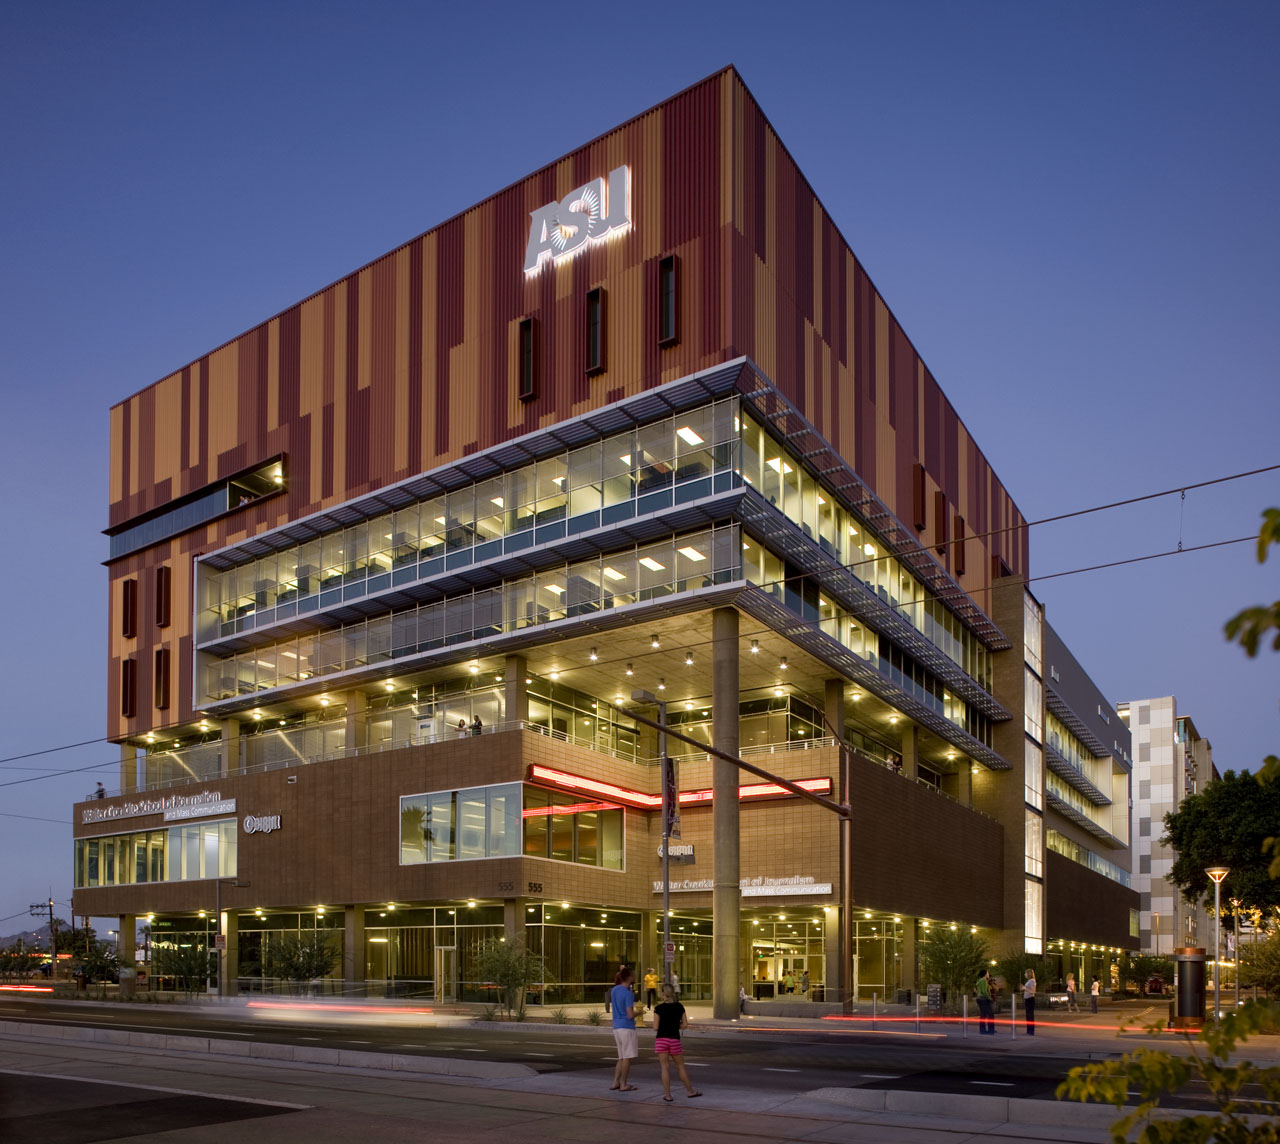 The exterior of Arizona State University's Walter Cronkite School of Journalism by Ehrlich Architects